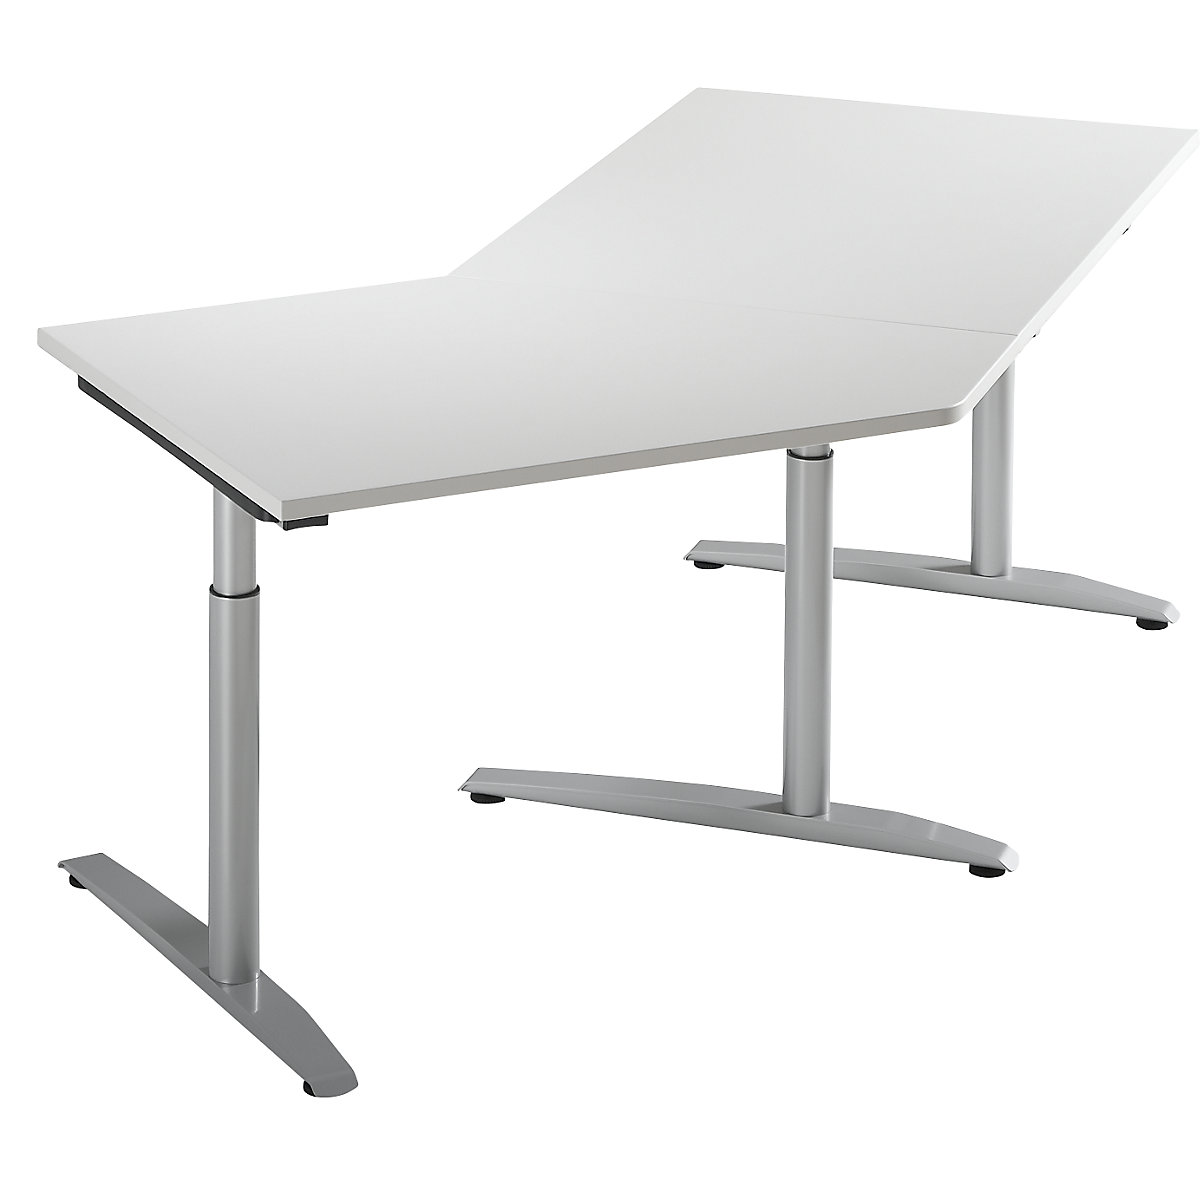 Add-on table, height adjustable from 650 - 850 mm HANNA